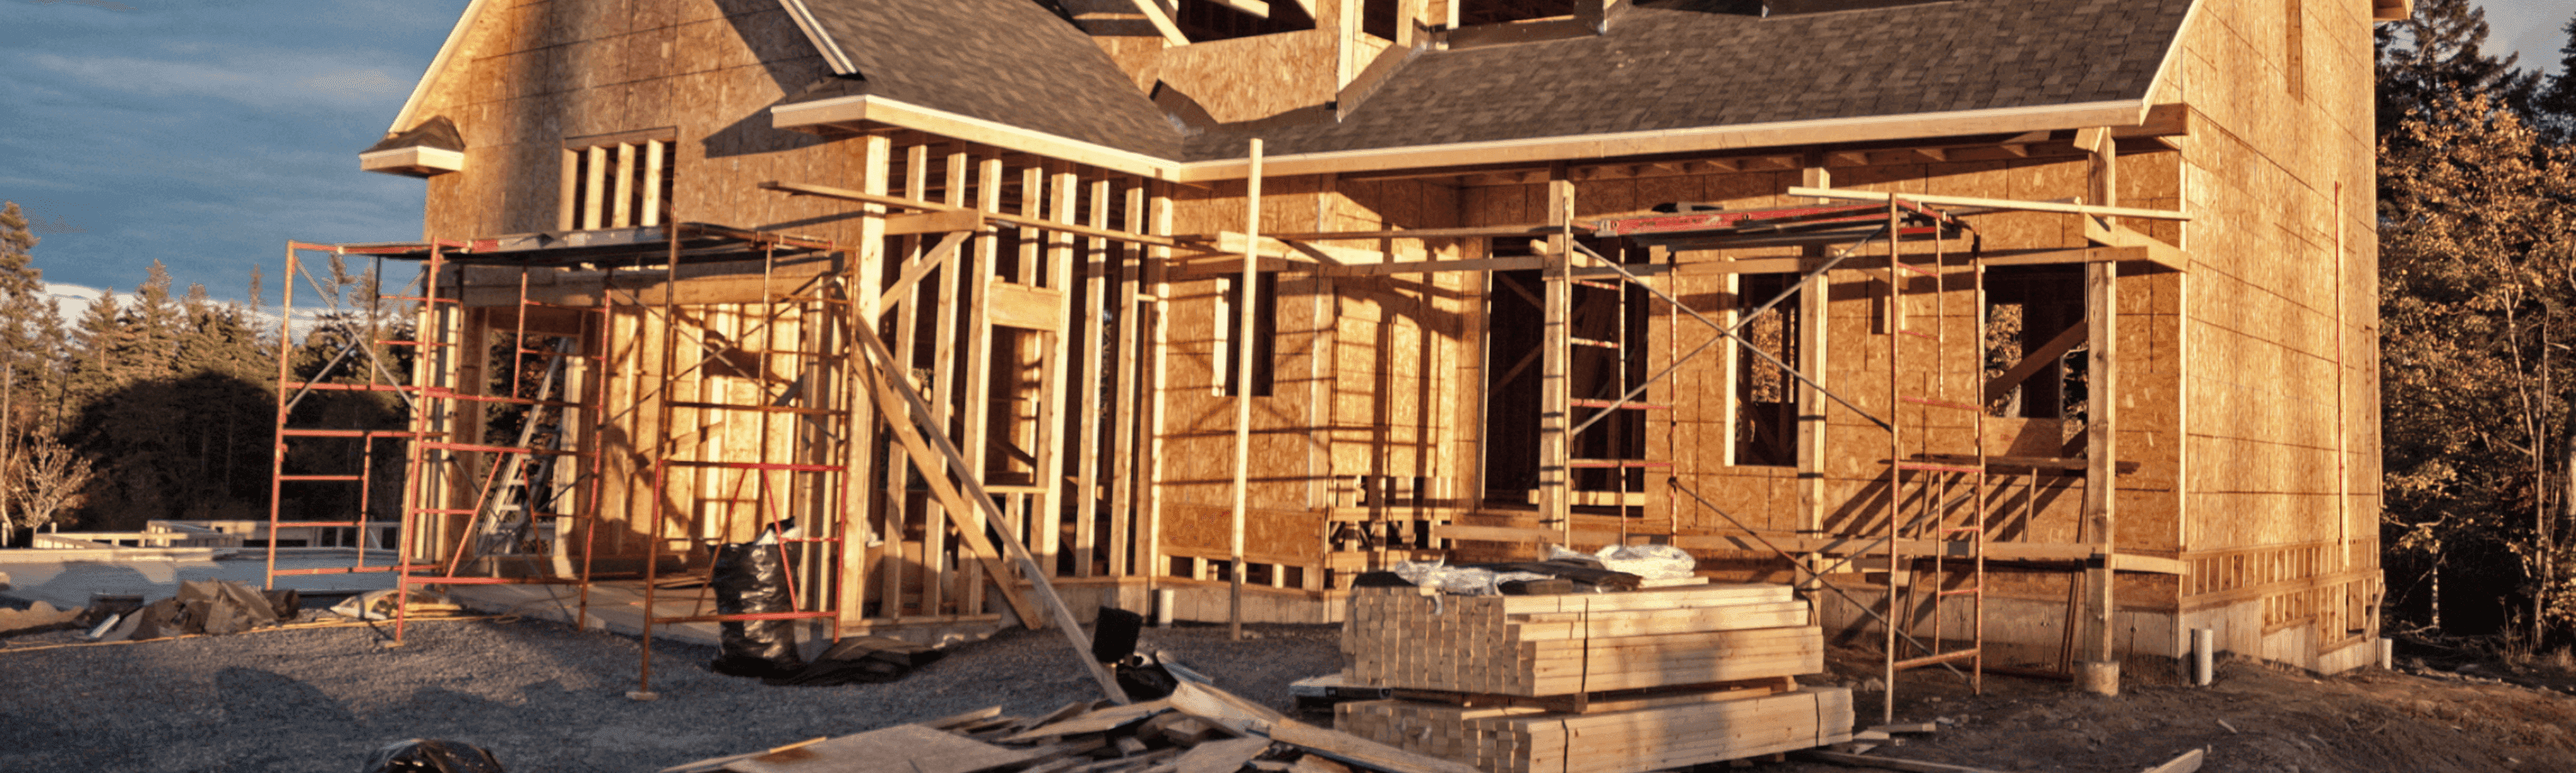 Understanding the Risks of Improper Notching and Boring in Home Construction